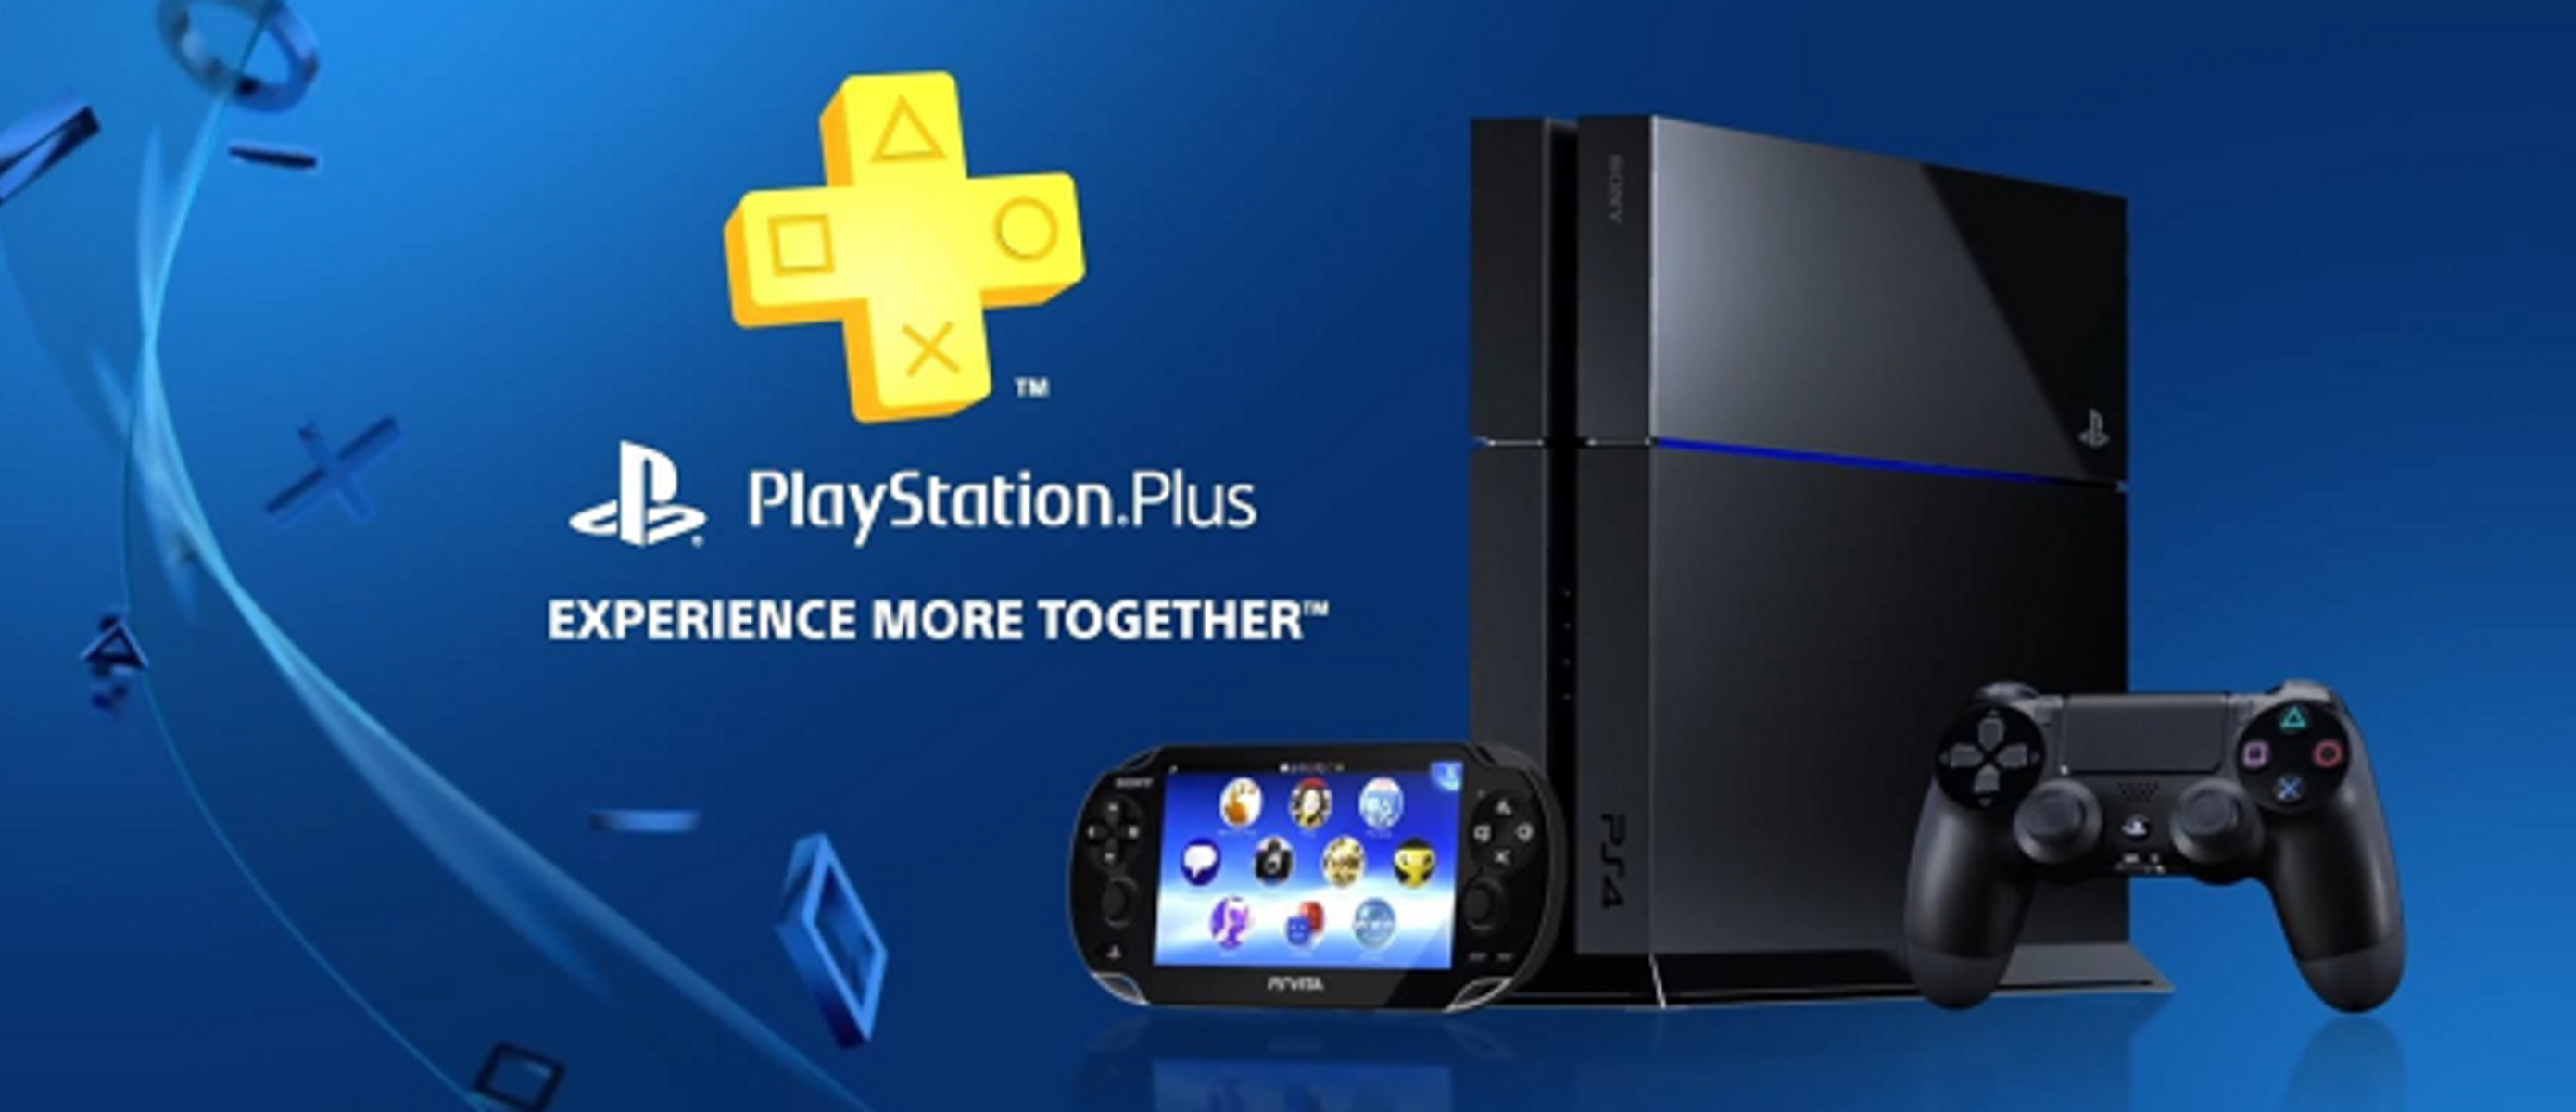 Ps4 extra. Сони плейстейшен 4 плюс. PLAYSTATION 4 PS Plus. PS Plus ps4. PLAYSTATION Plus Deluxe.